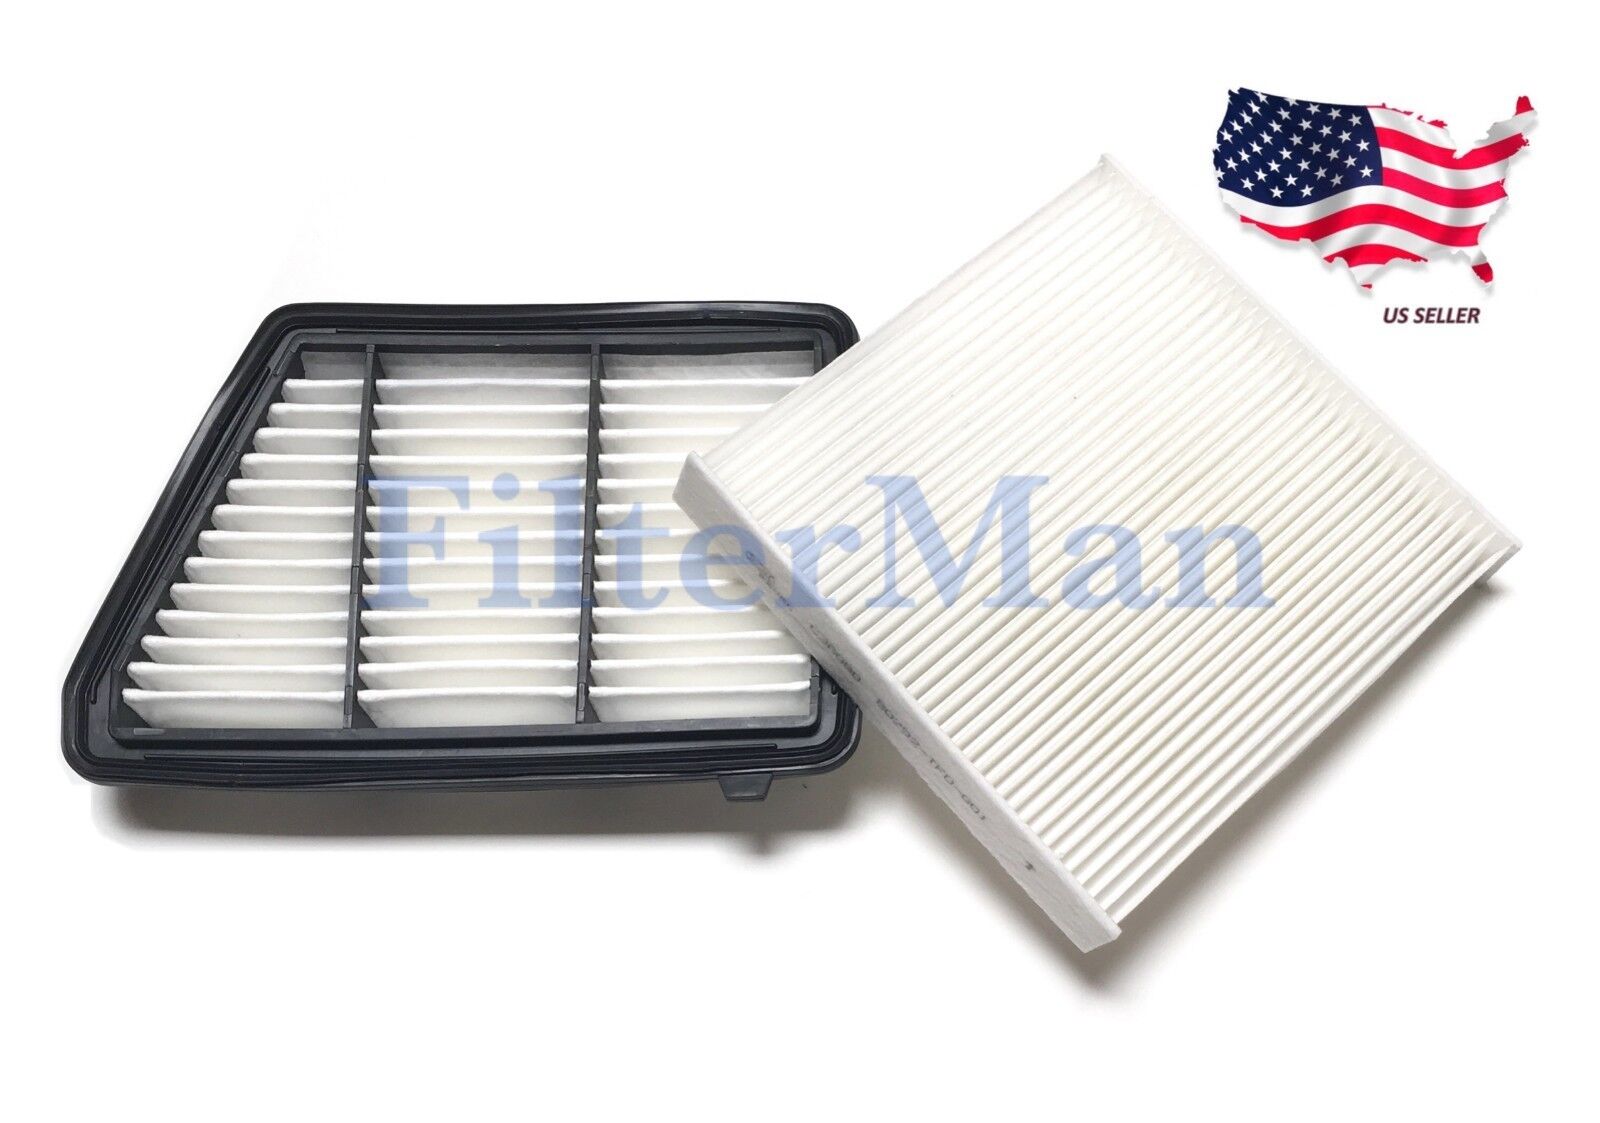 ENGINE & CABIN AIR FILTER for Honda CRV 2.4L ONLY 2017-2020 17220-5PH-A00 